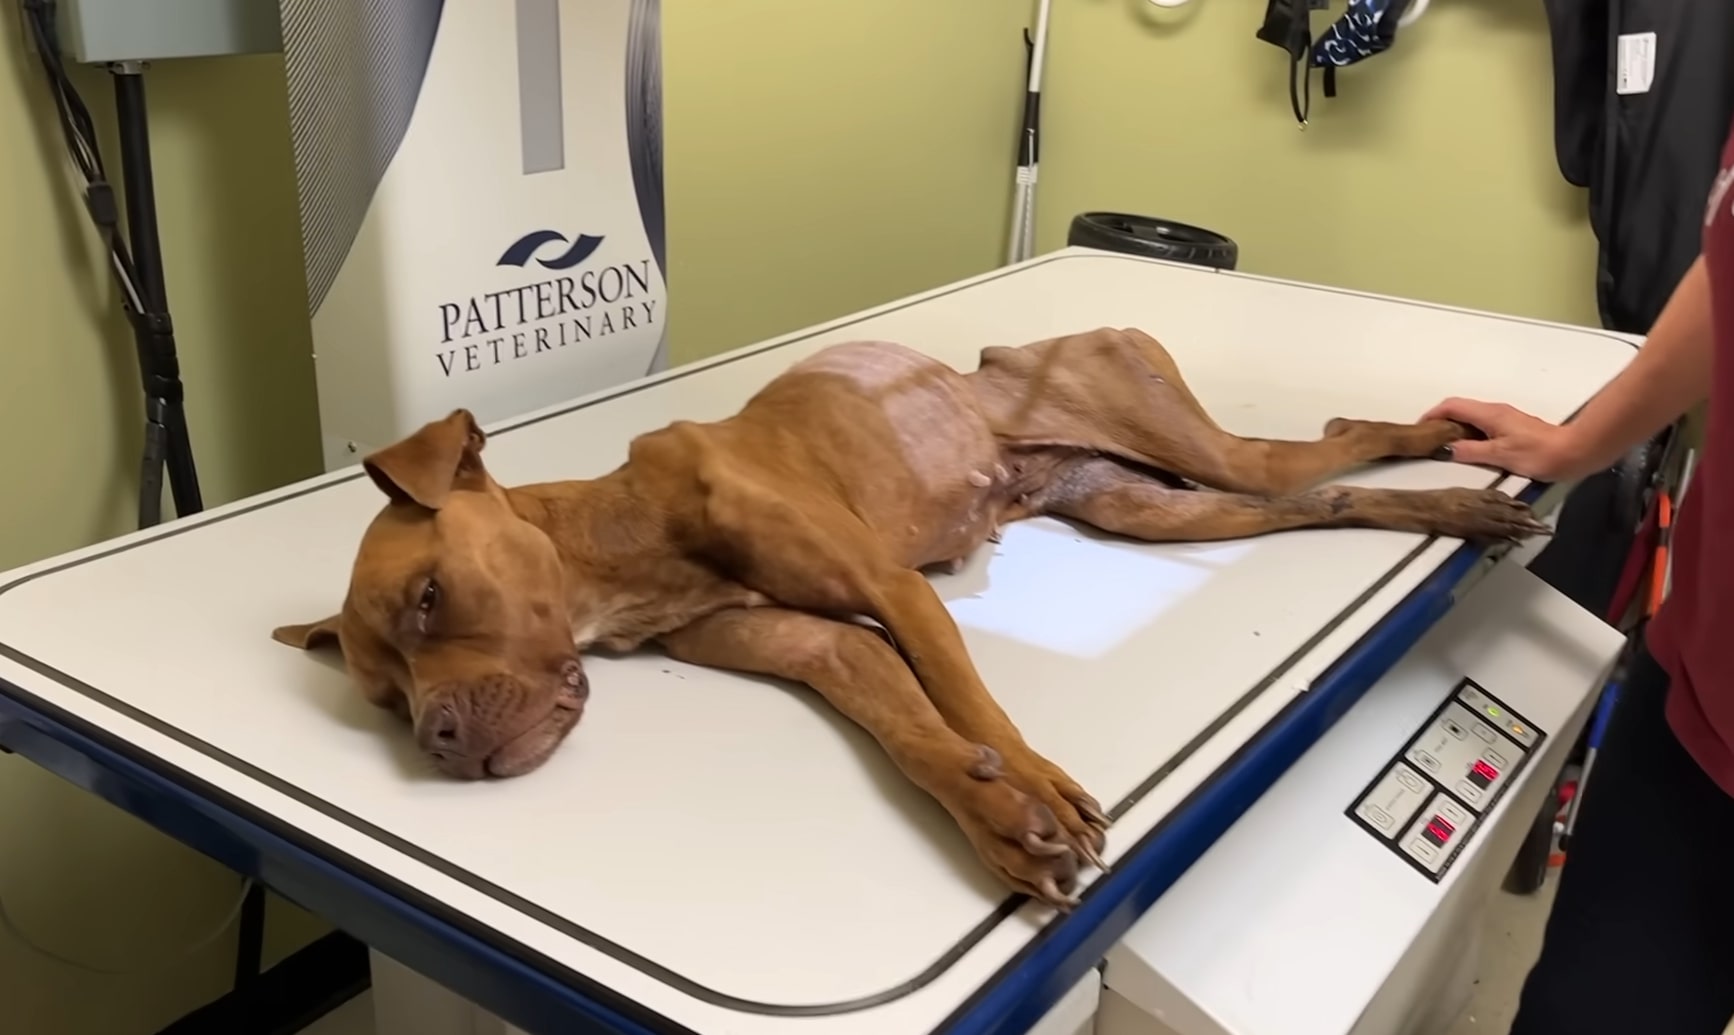 the paralyzed dog is lying on the table at the vet